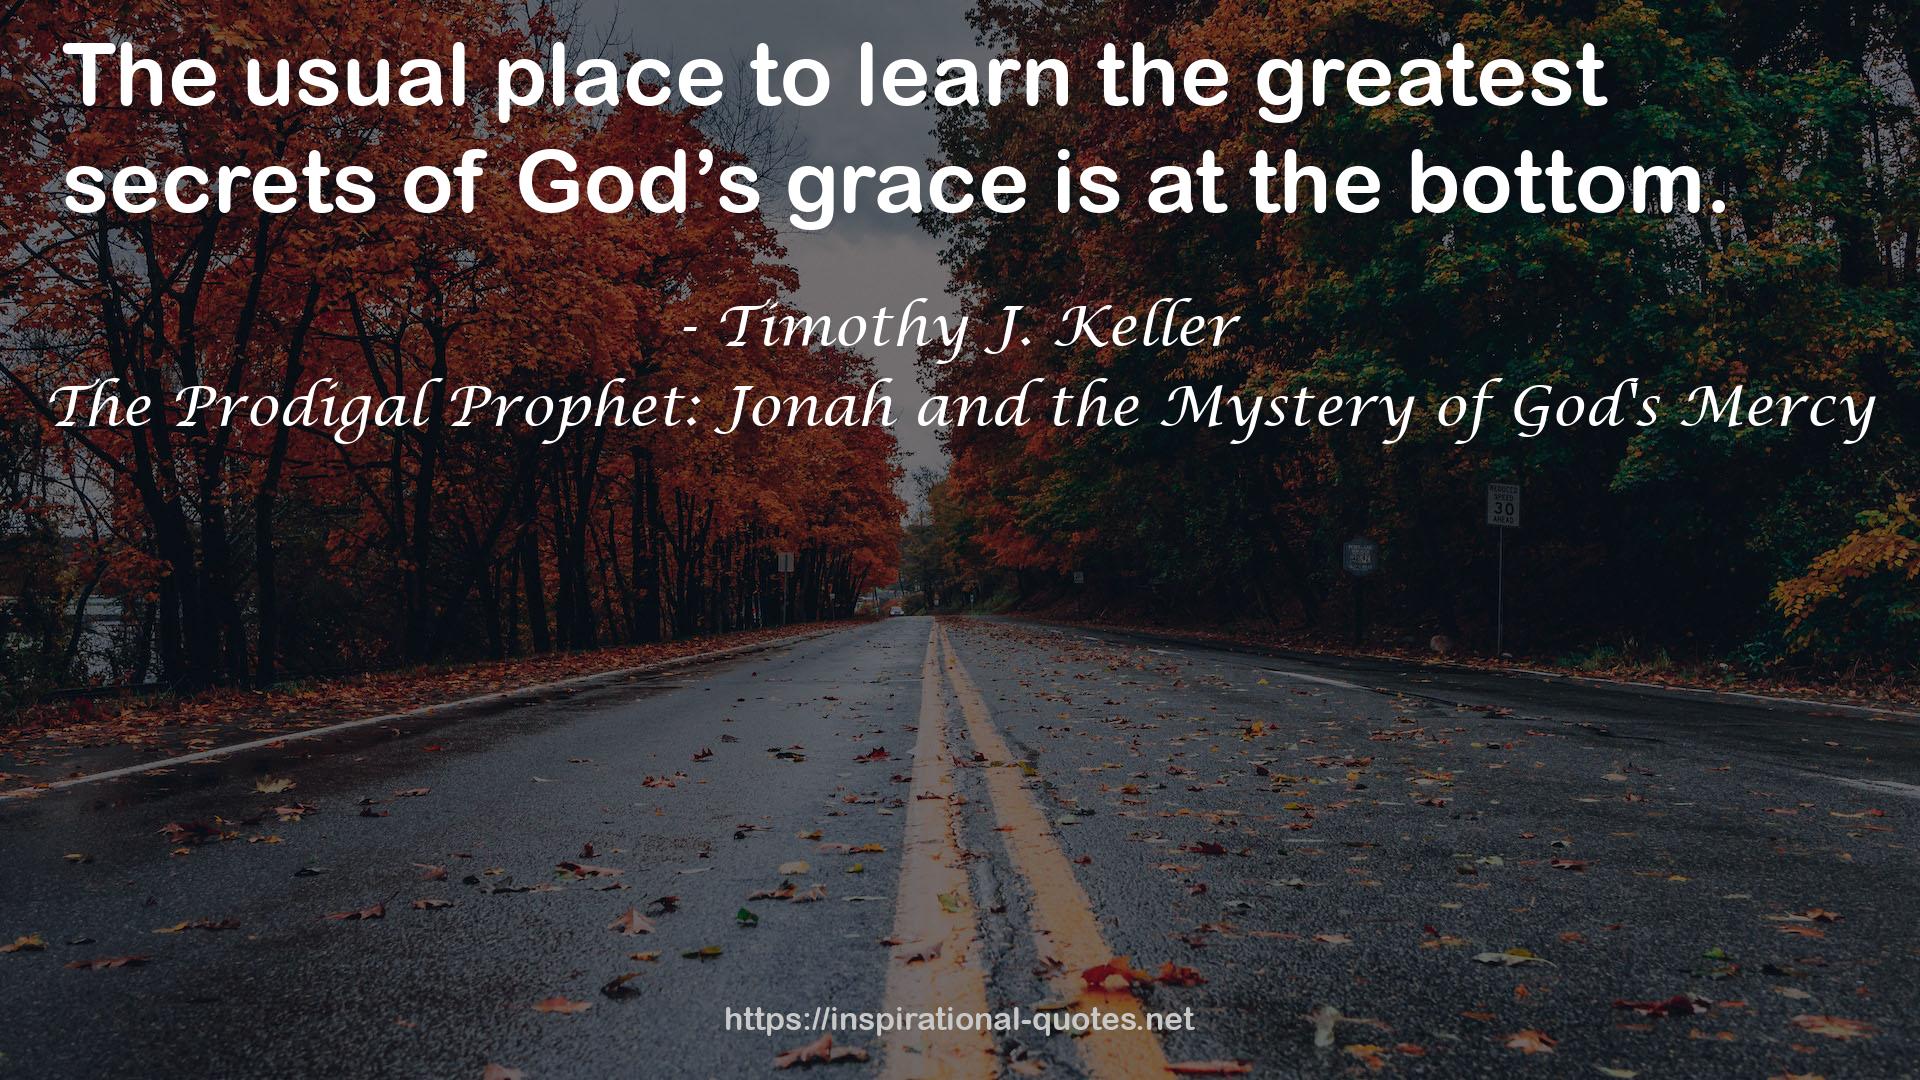 The Prodigal Prophet: Jonah and the Mystery of God's Mercy QUOTES